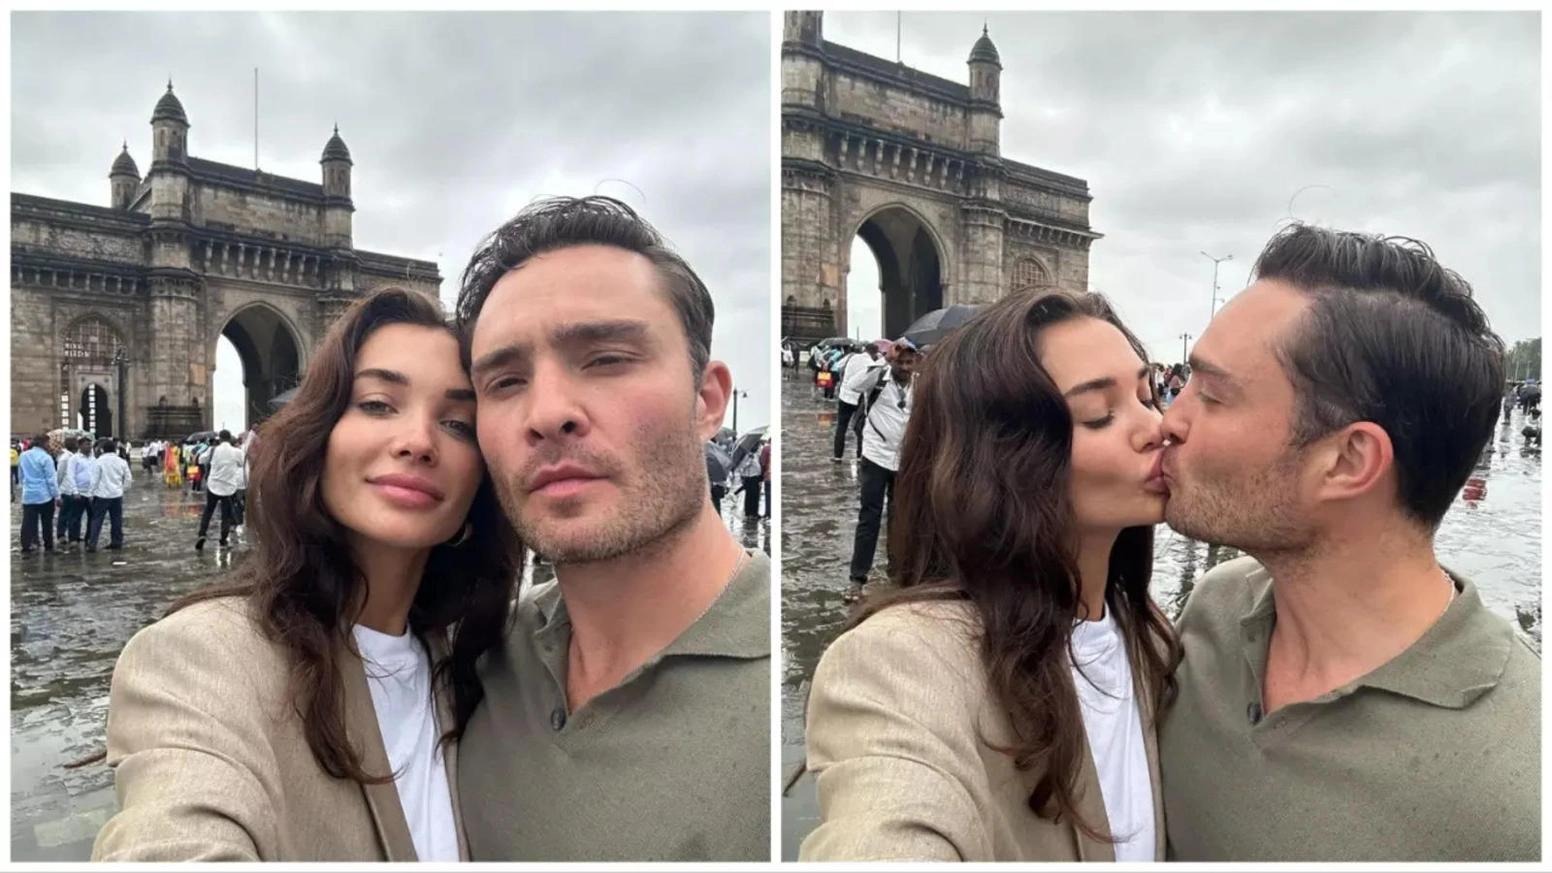 Dreamy Engagement of Actress Amy Jackson and Gossip Girl Actor Ed Westwick- Kiara Advani, Orry and other celebrities Commented on IG